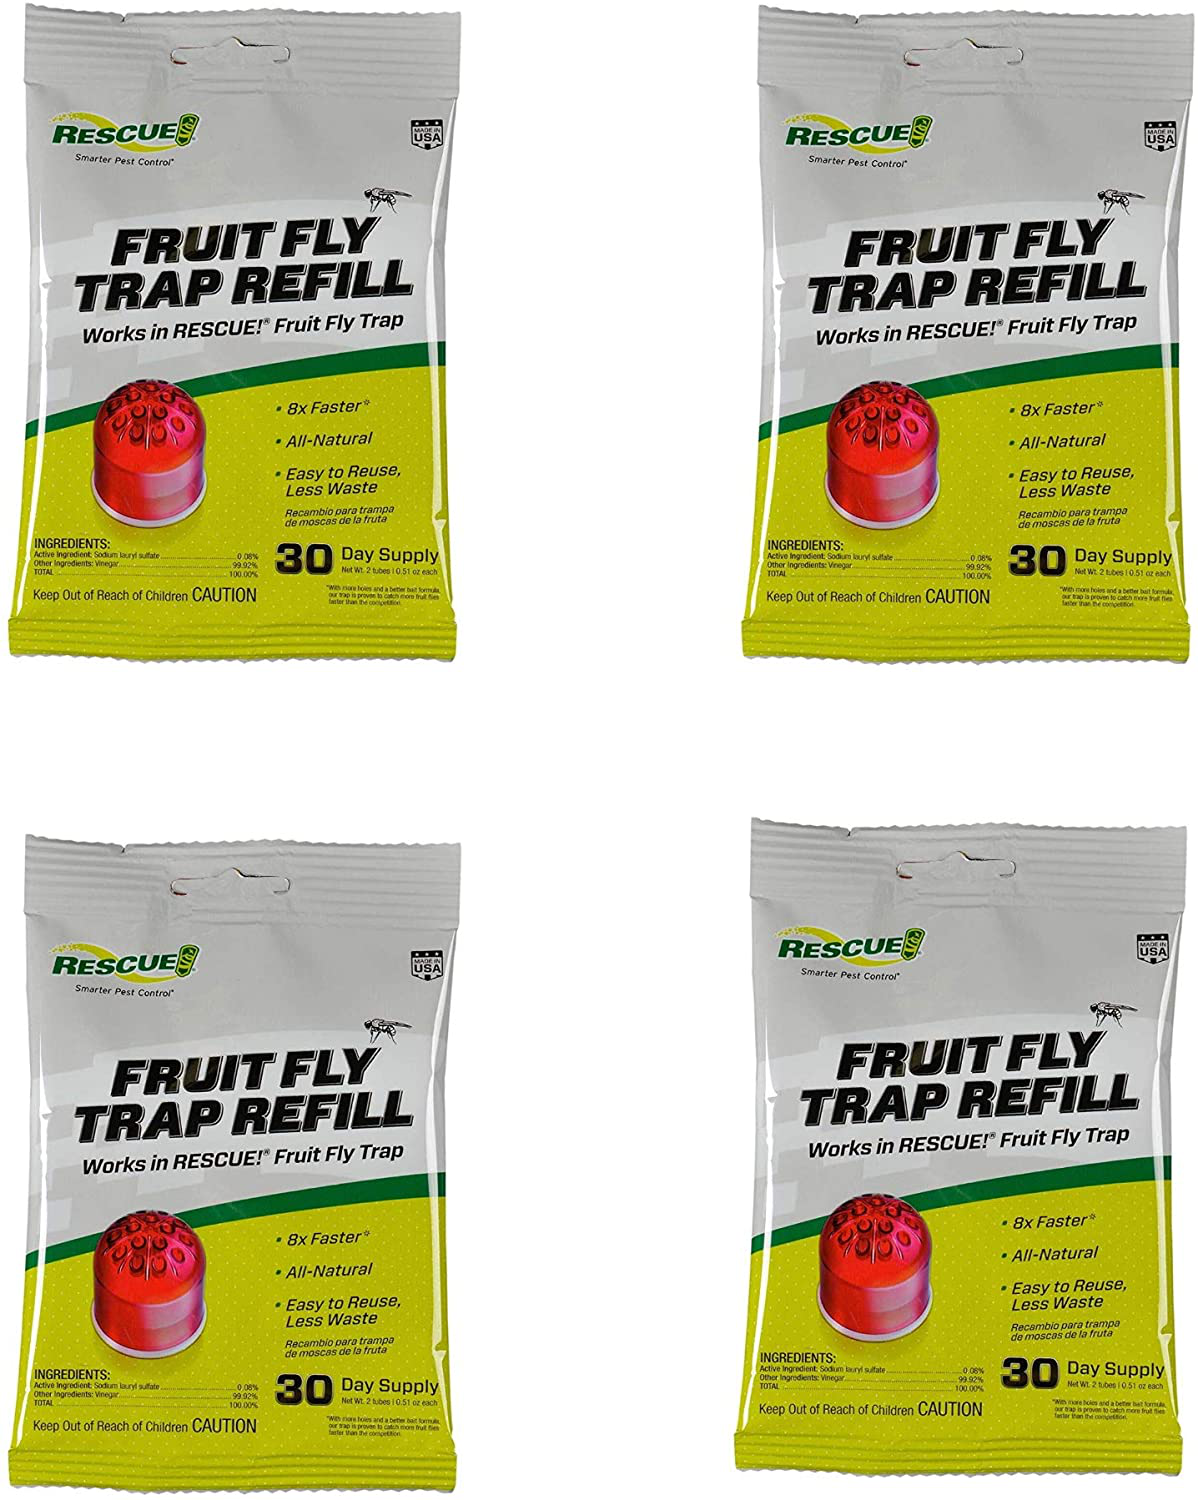 RESCUE FFTA Non-Toxic Fruit Fly Trap Attractant Refill, 30 Days, attaractant, 4 Pack